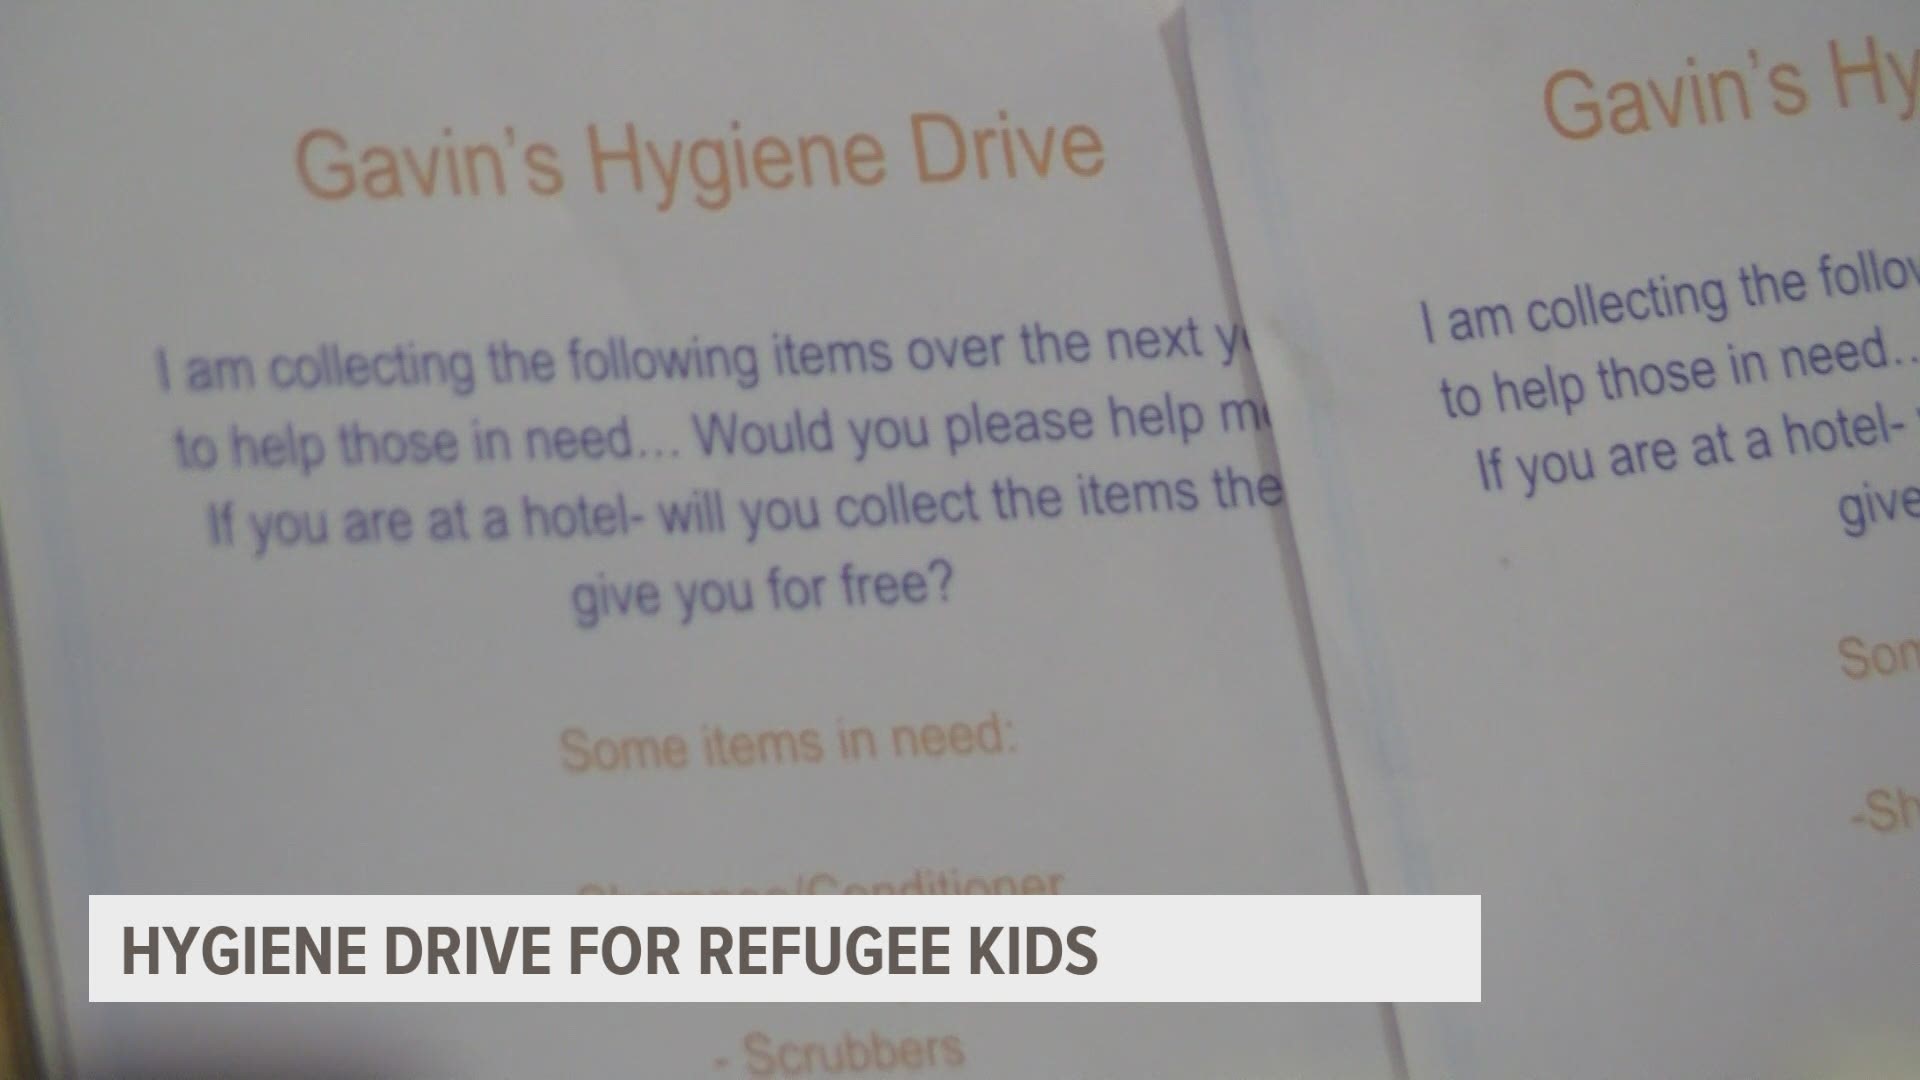 Gavin Anderson is collecting products for his hygiene drive to give back to refugee kids in need. He's looking for community support to help him reach as many kids.